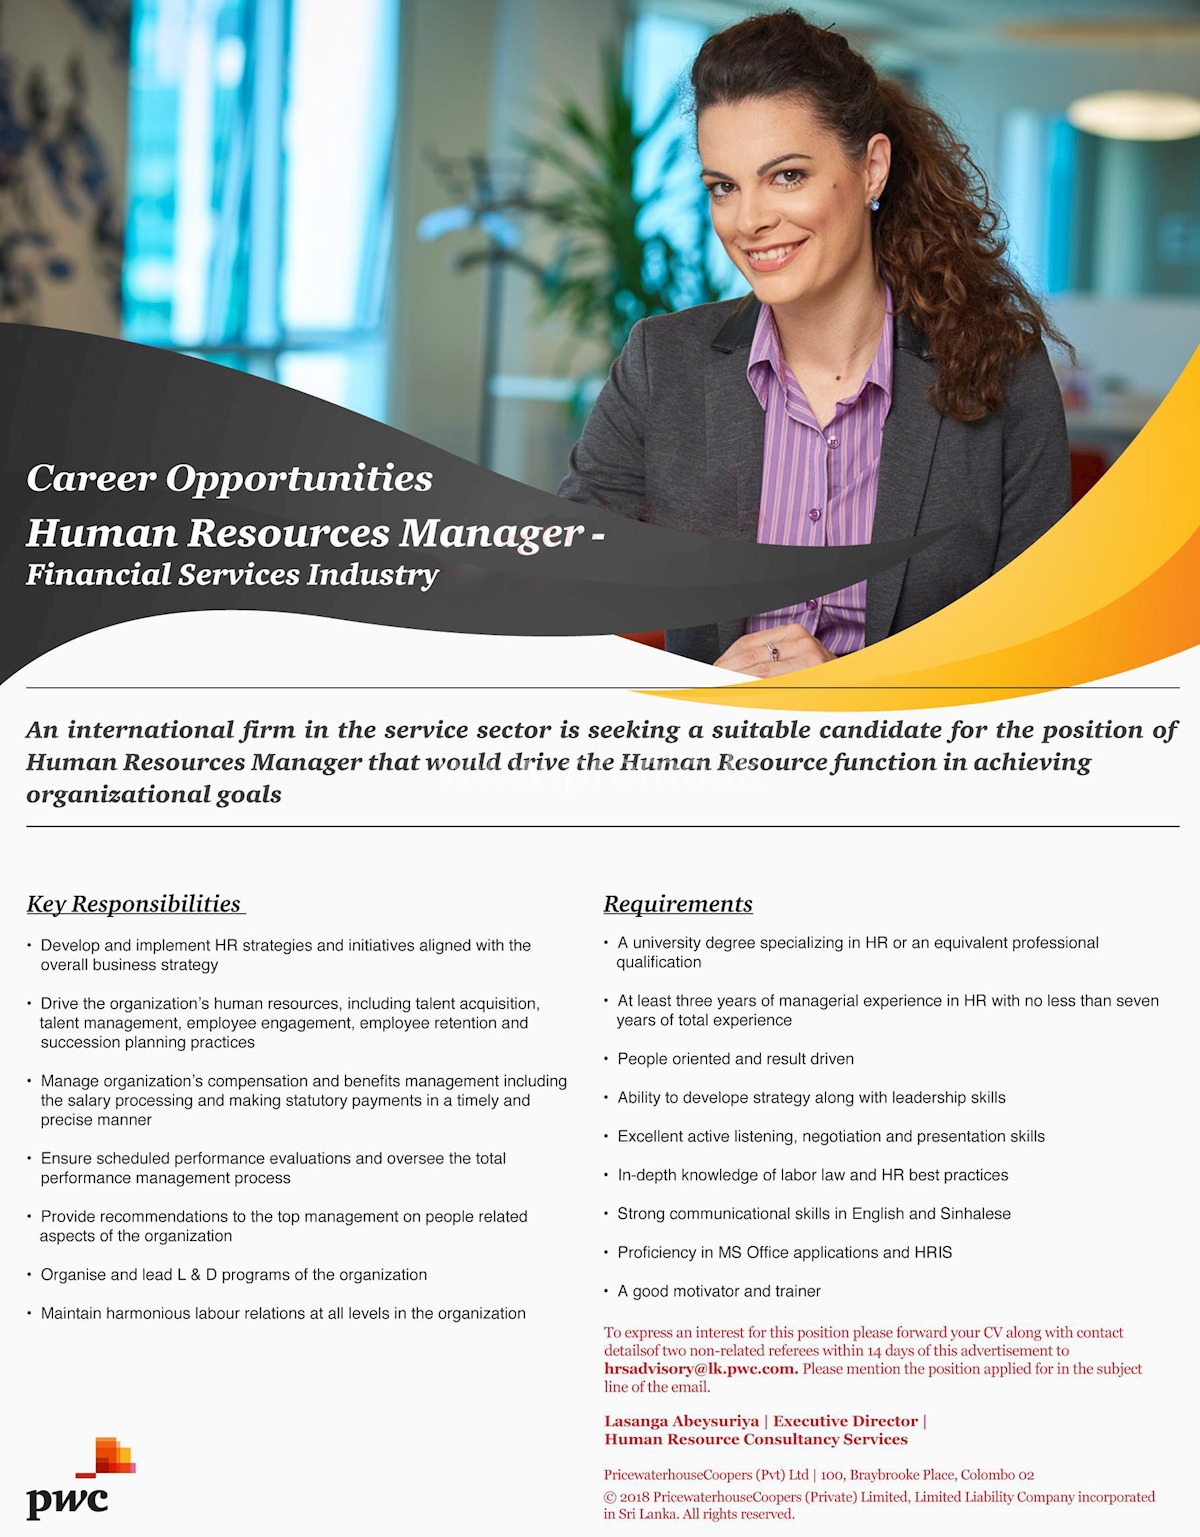 Human Resources Manager - Financial Services Industry